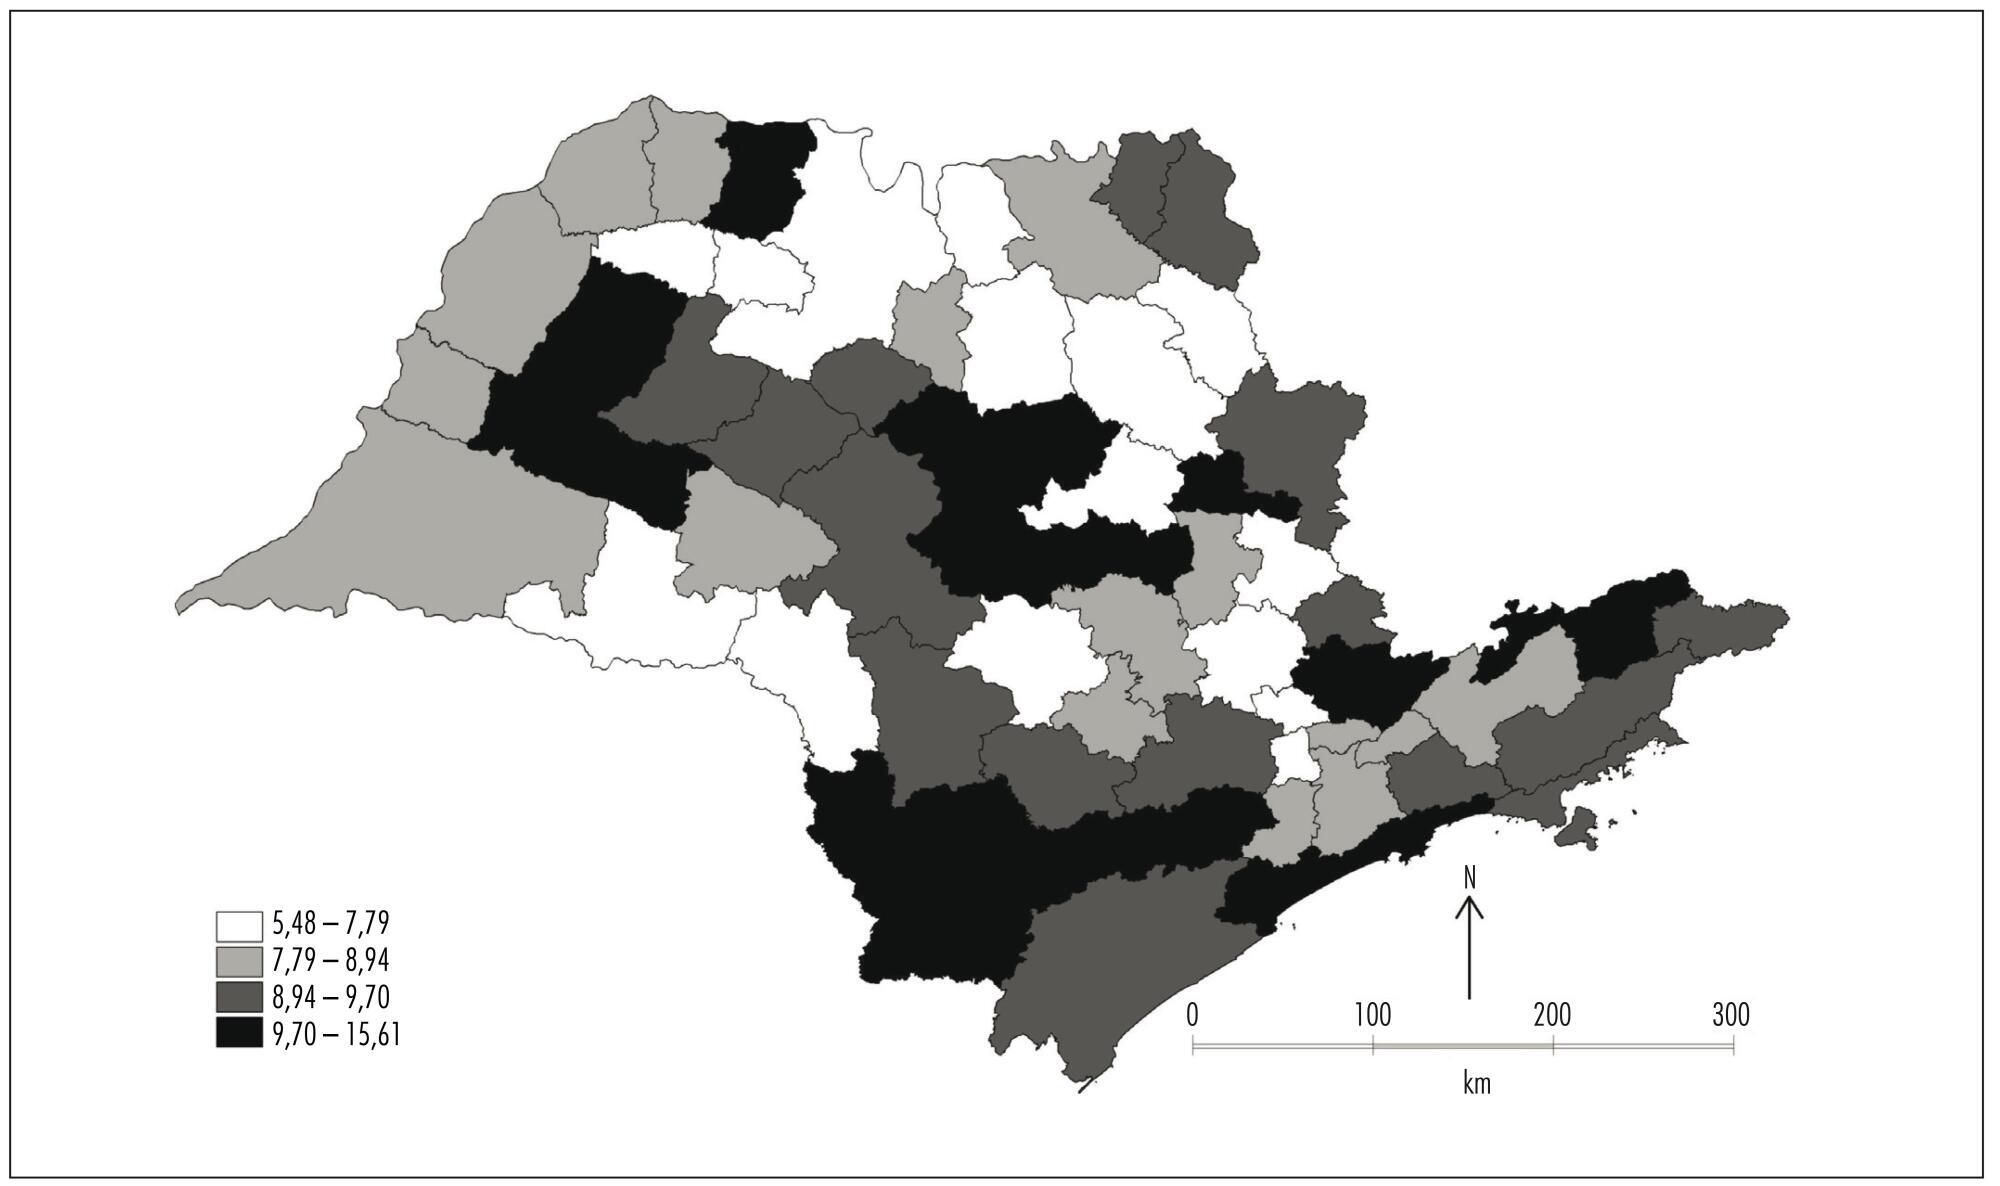 Neonatal mortality and avoidable causes in the micro regions of São Paulo state